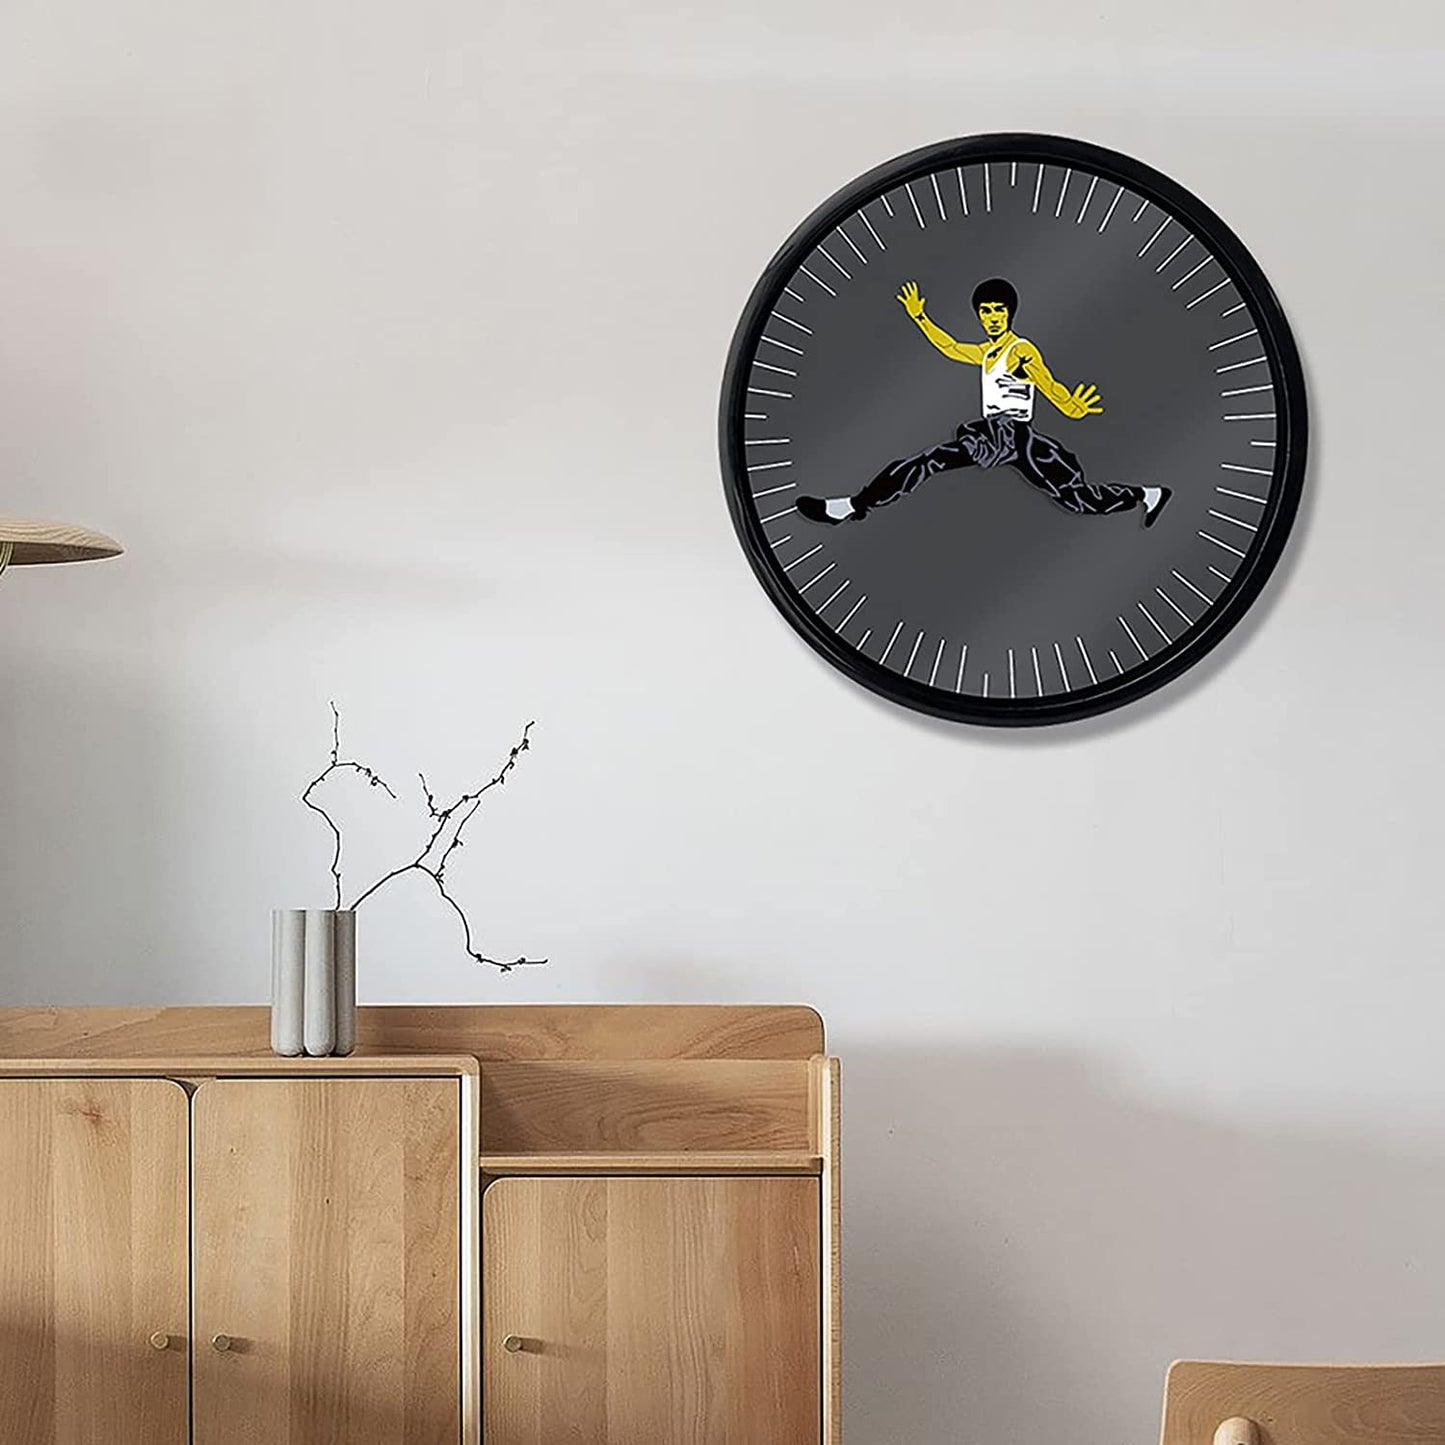 Kung Fu Wall Clock Bruce Lee Home Decoration Personality Creative Round Clock